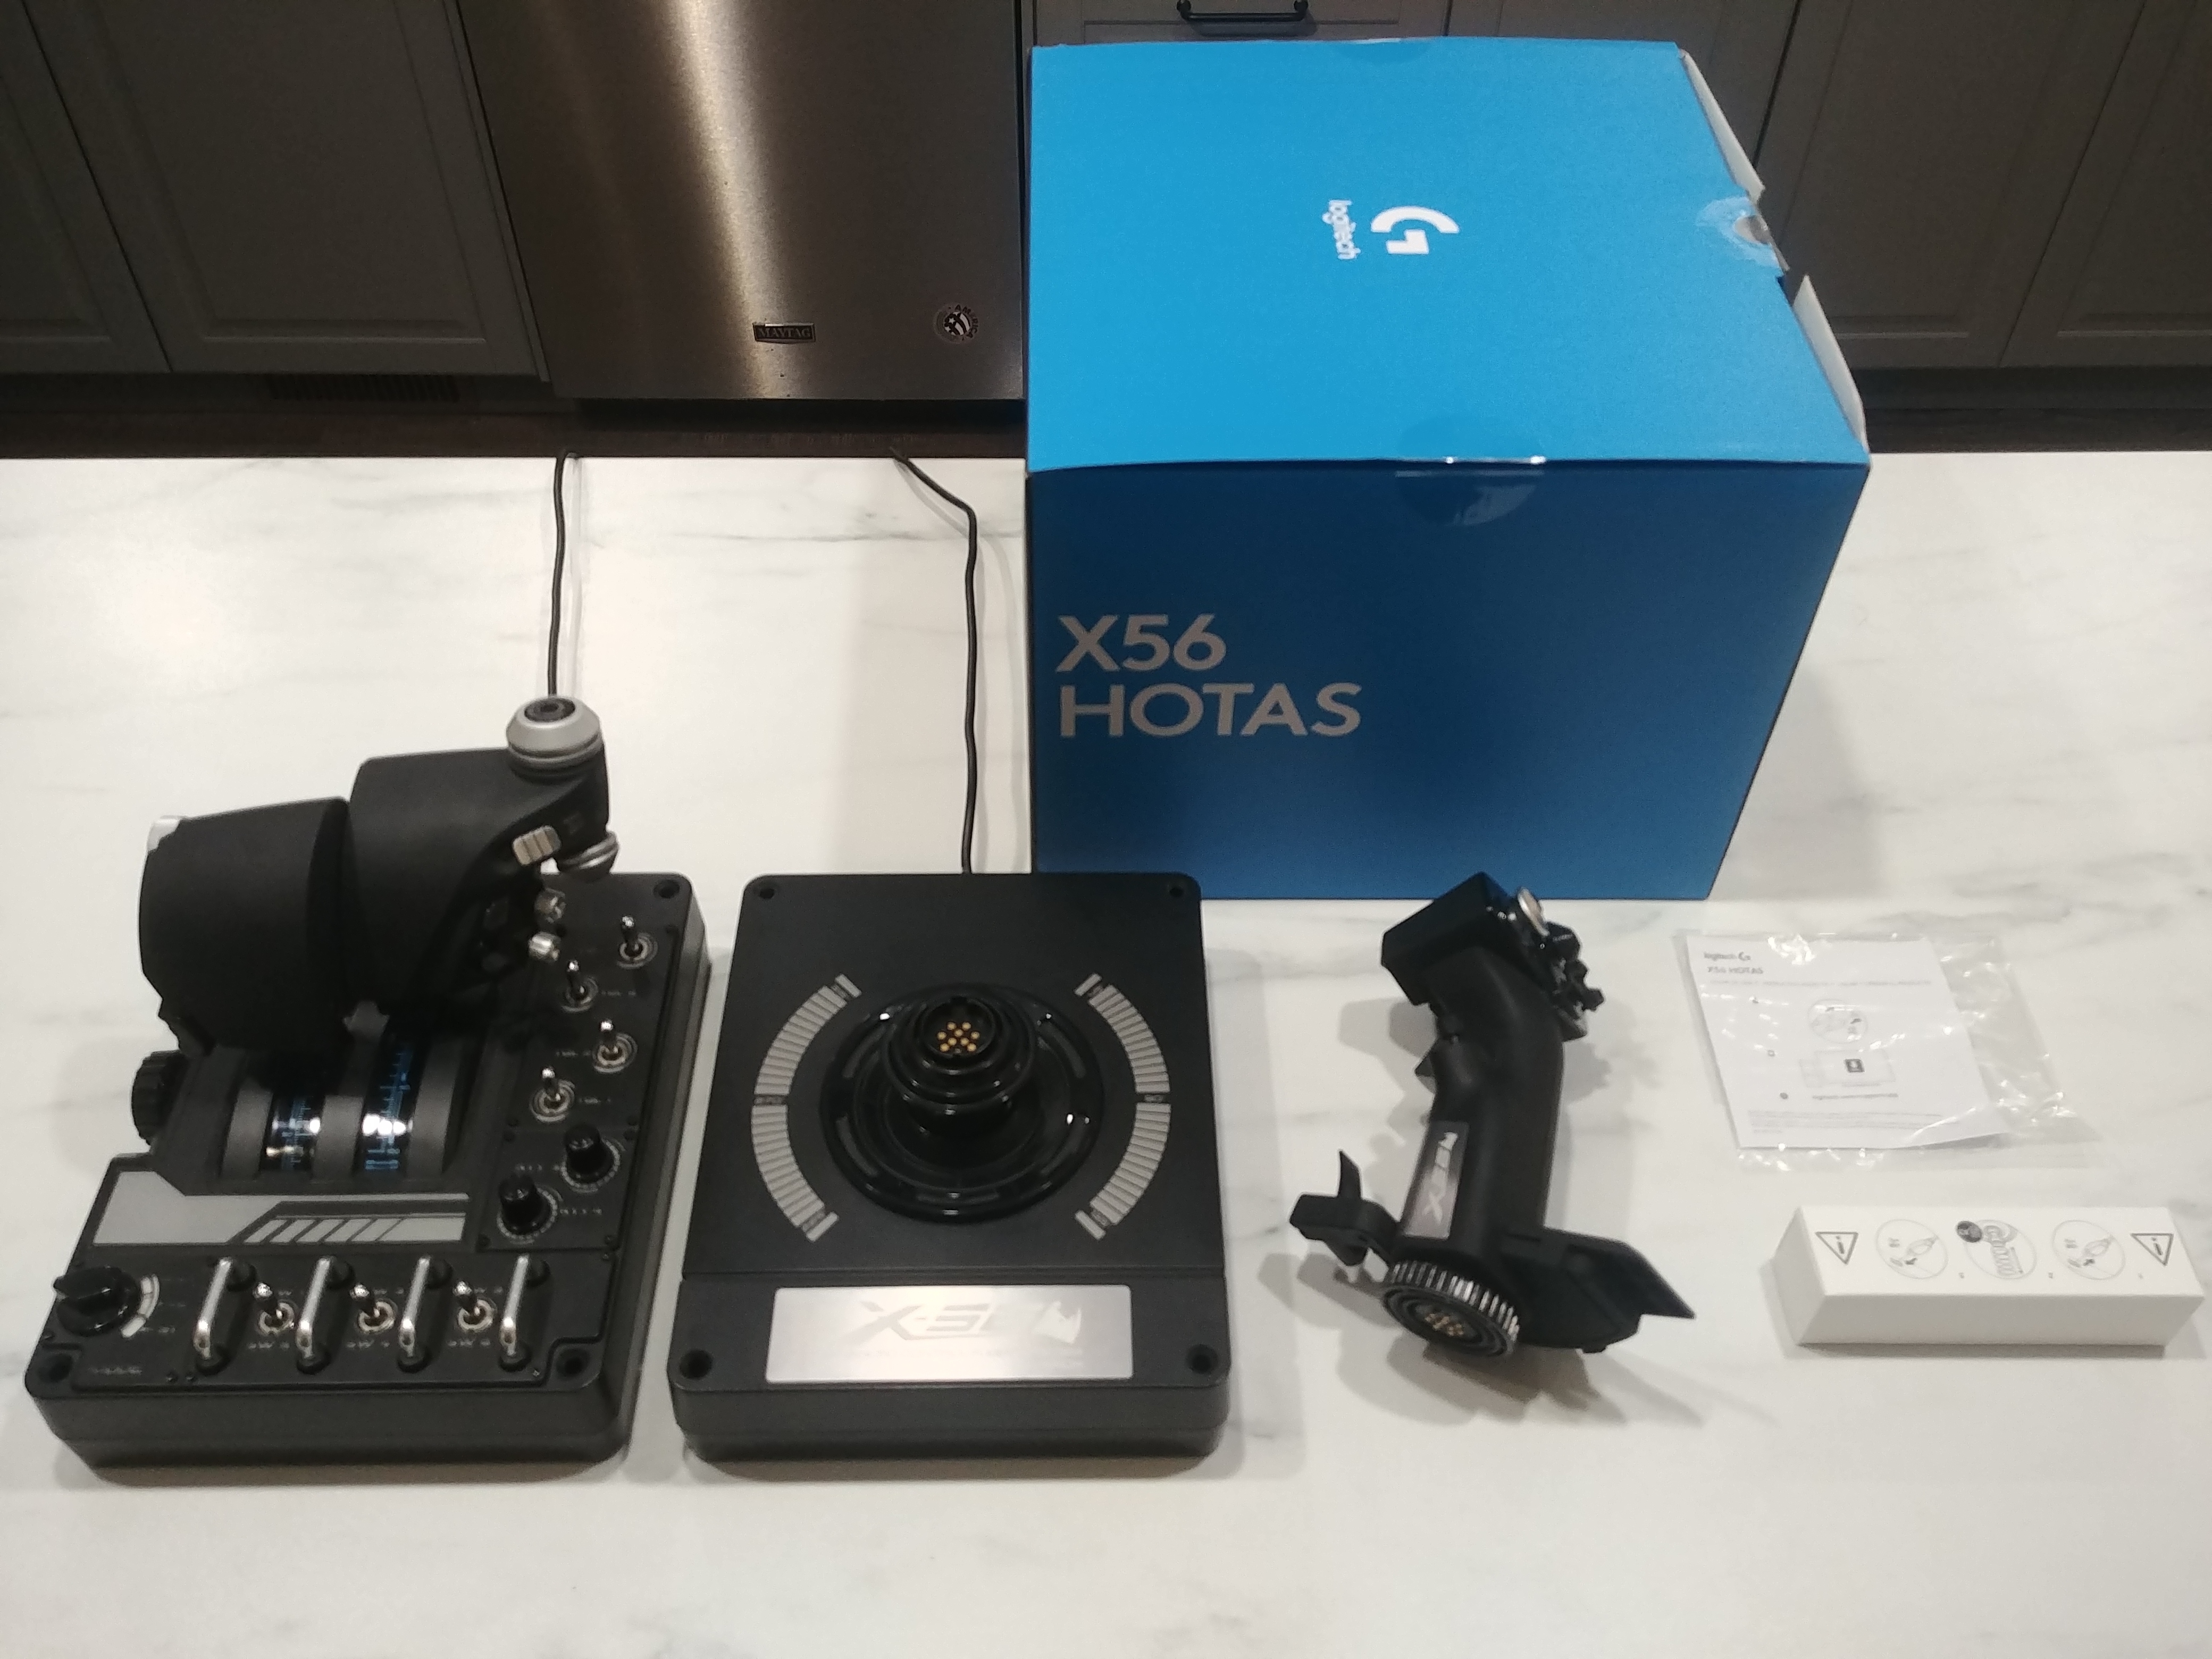 For Sale: Used Logitech X56 H.O.T.A.S. - - ED